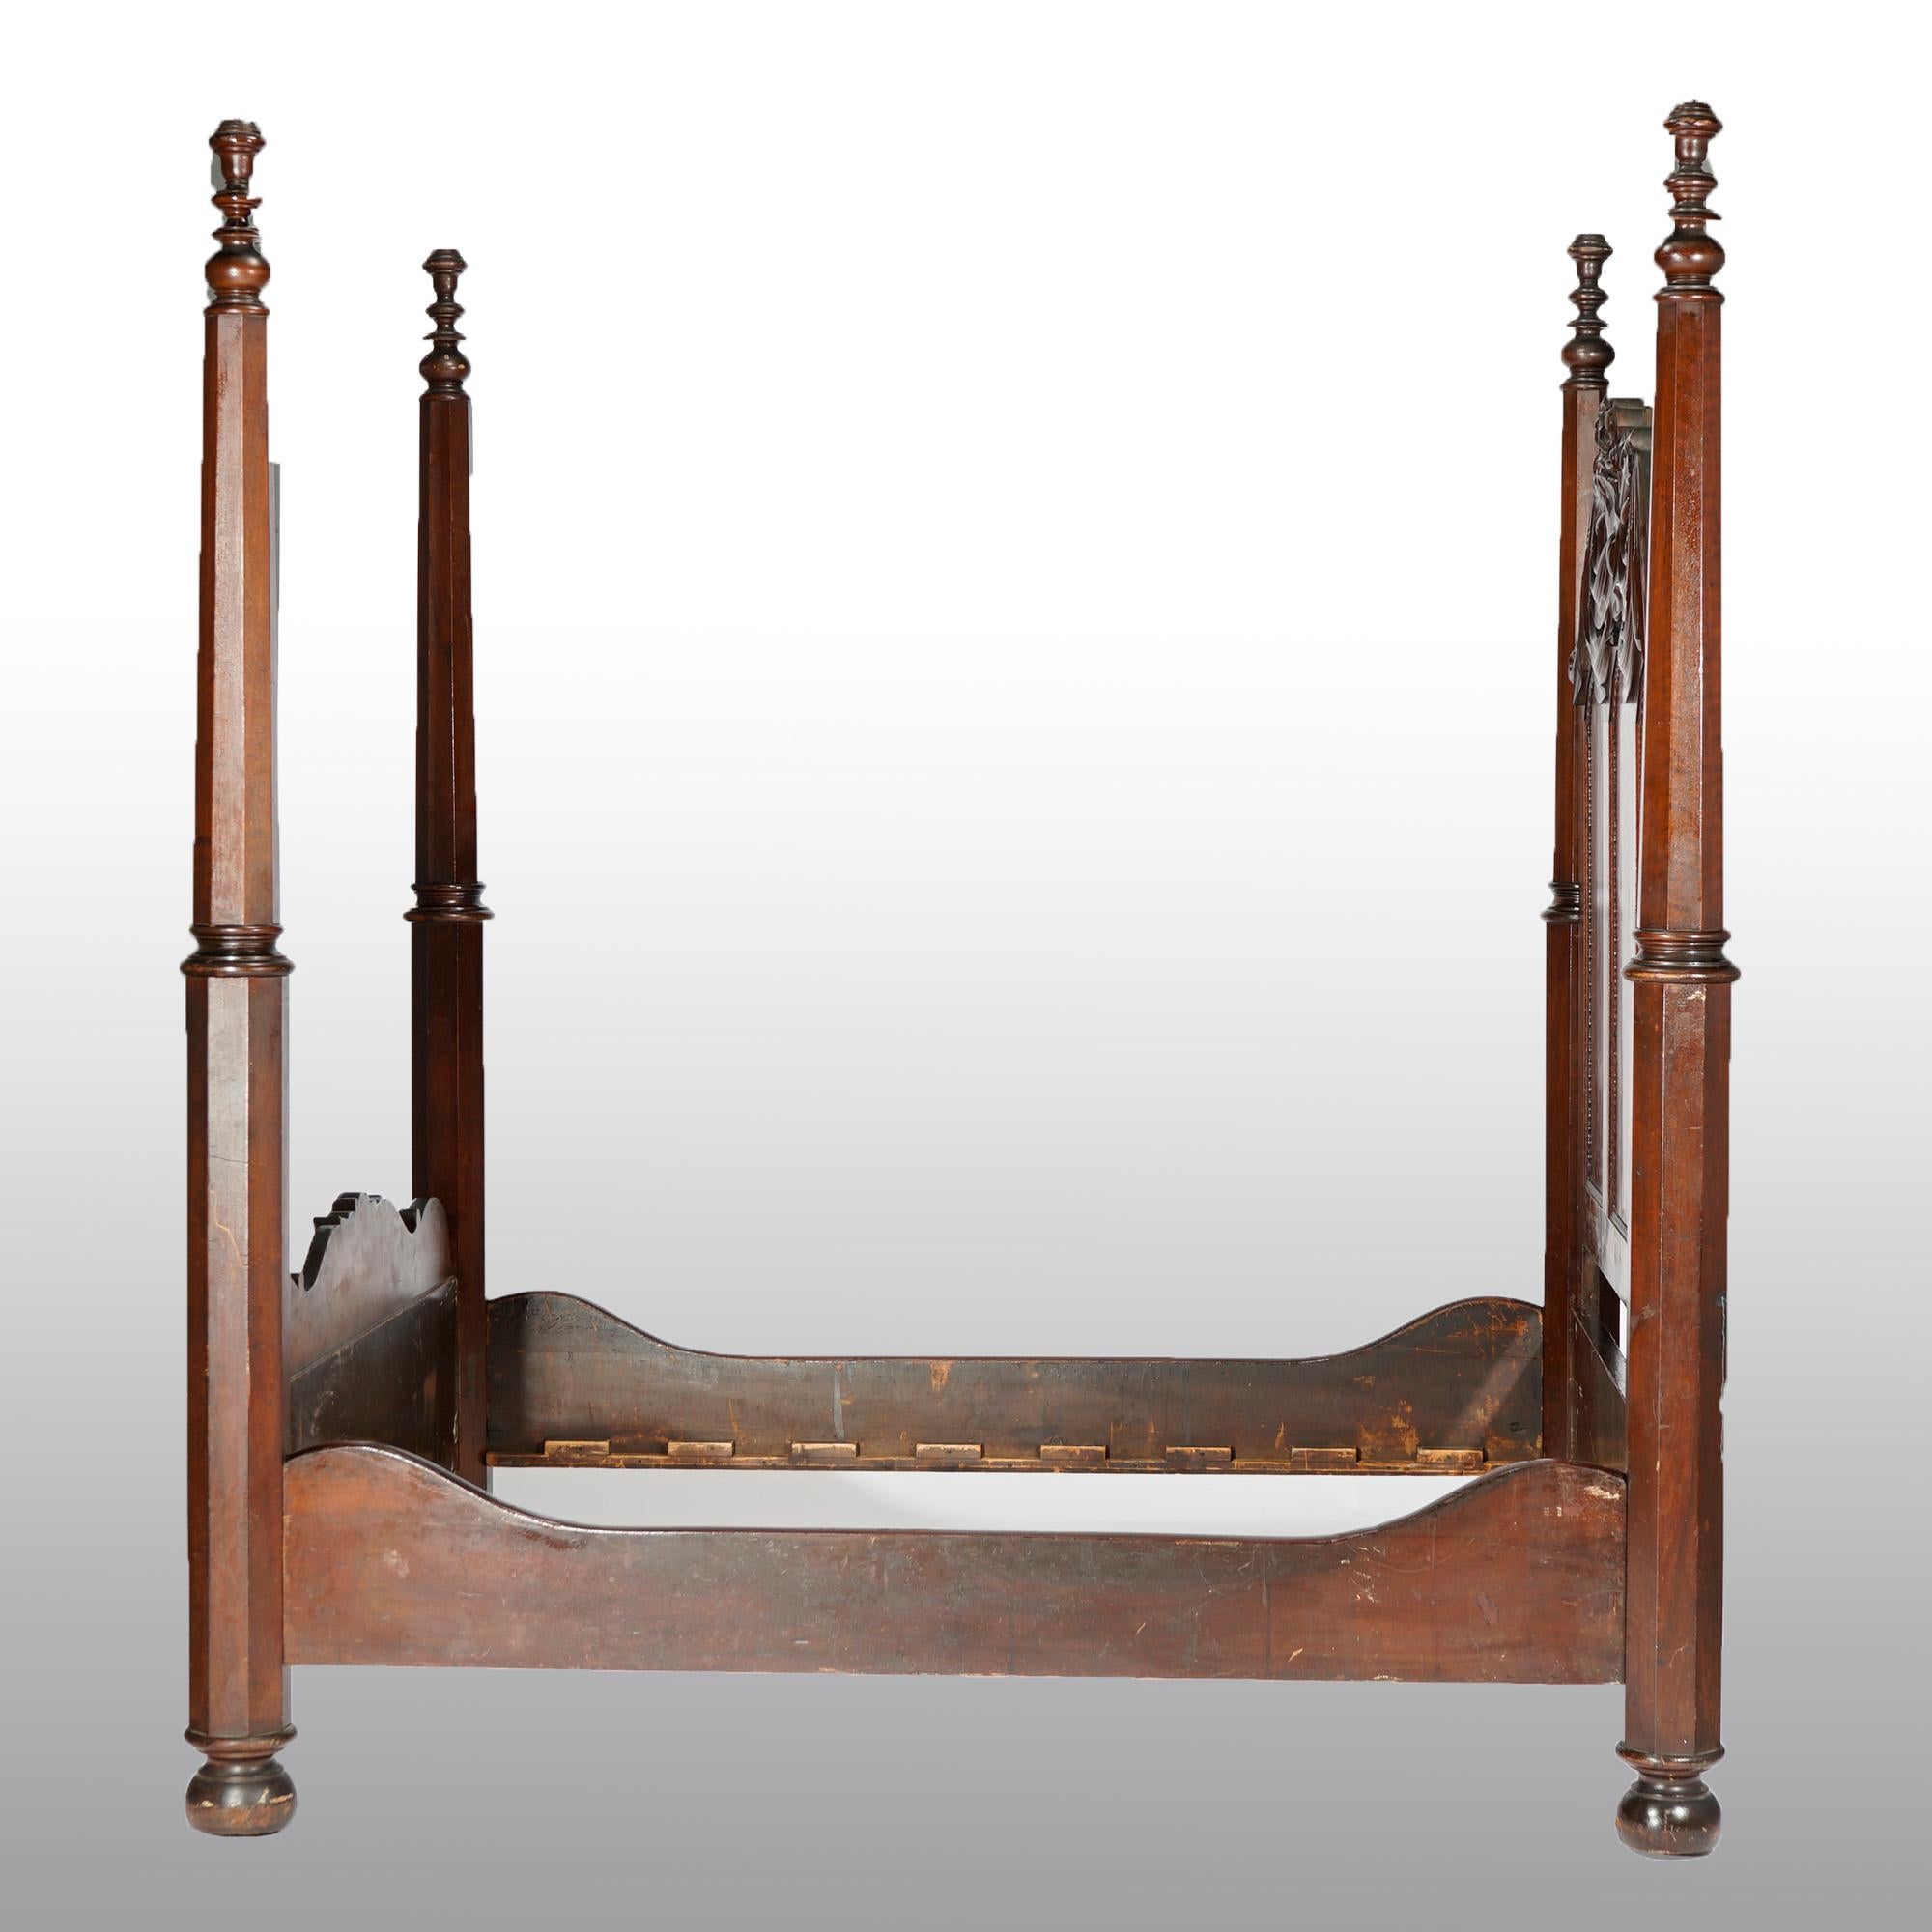 An antique American Empire Greco full size tester bed offers flame mahogany construction with paneled headboard in arch form with carved foliate, floral and shield crest with flanking faceted supports, raised on bun feet, carved decoration